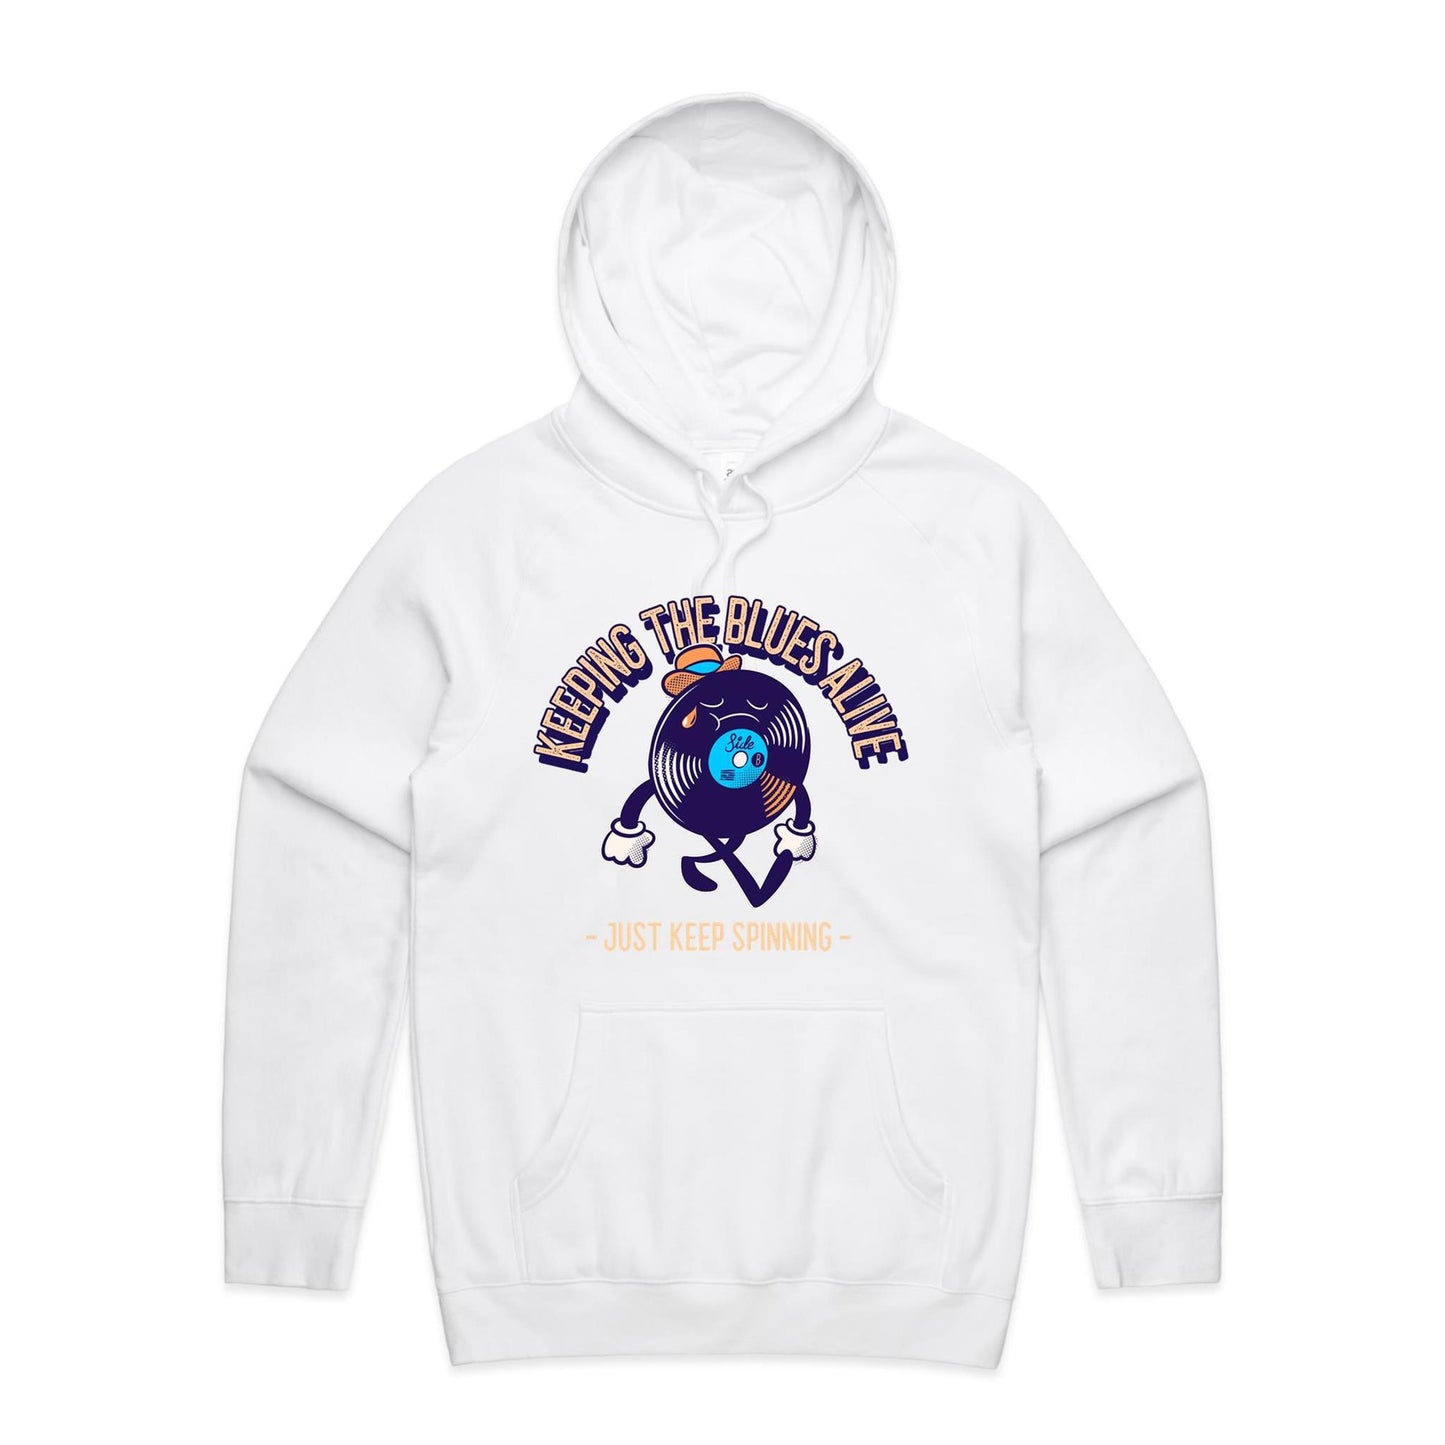 Keeping The Blues Alive - Supply Hood White Mens Supply Hoodie Music